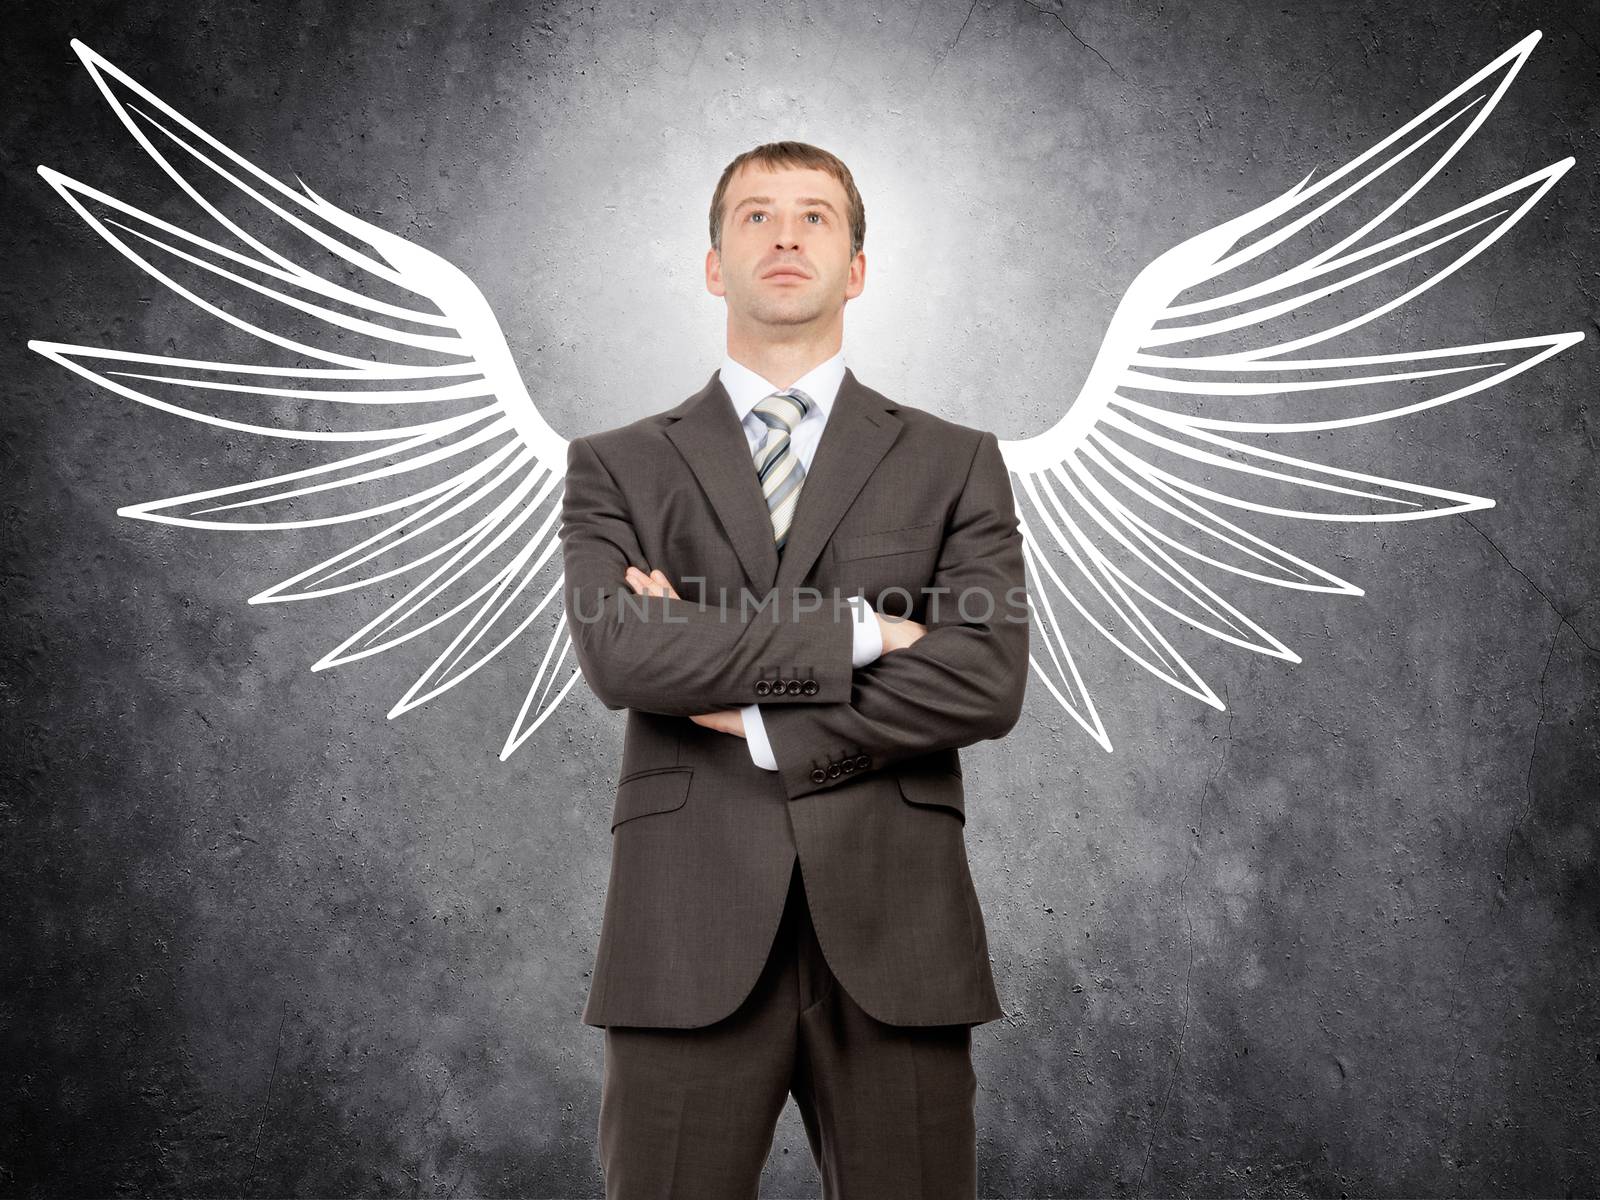 Businessman with drawn angel wings looking at camera